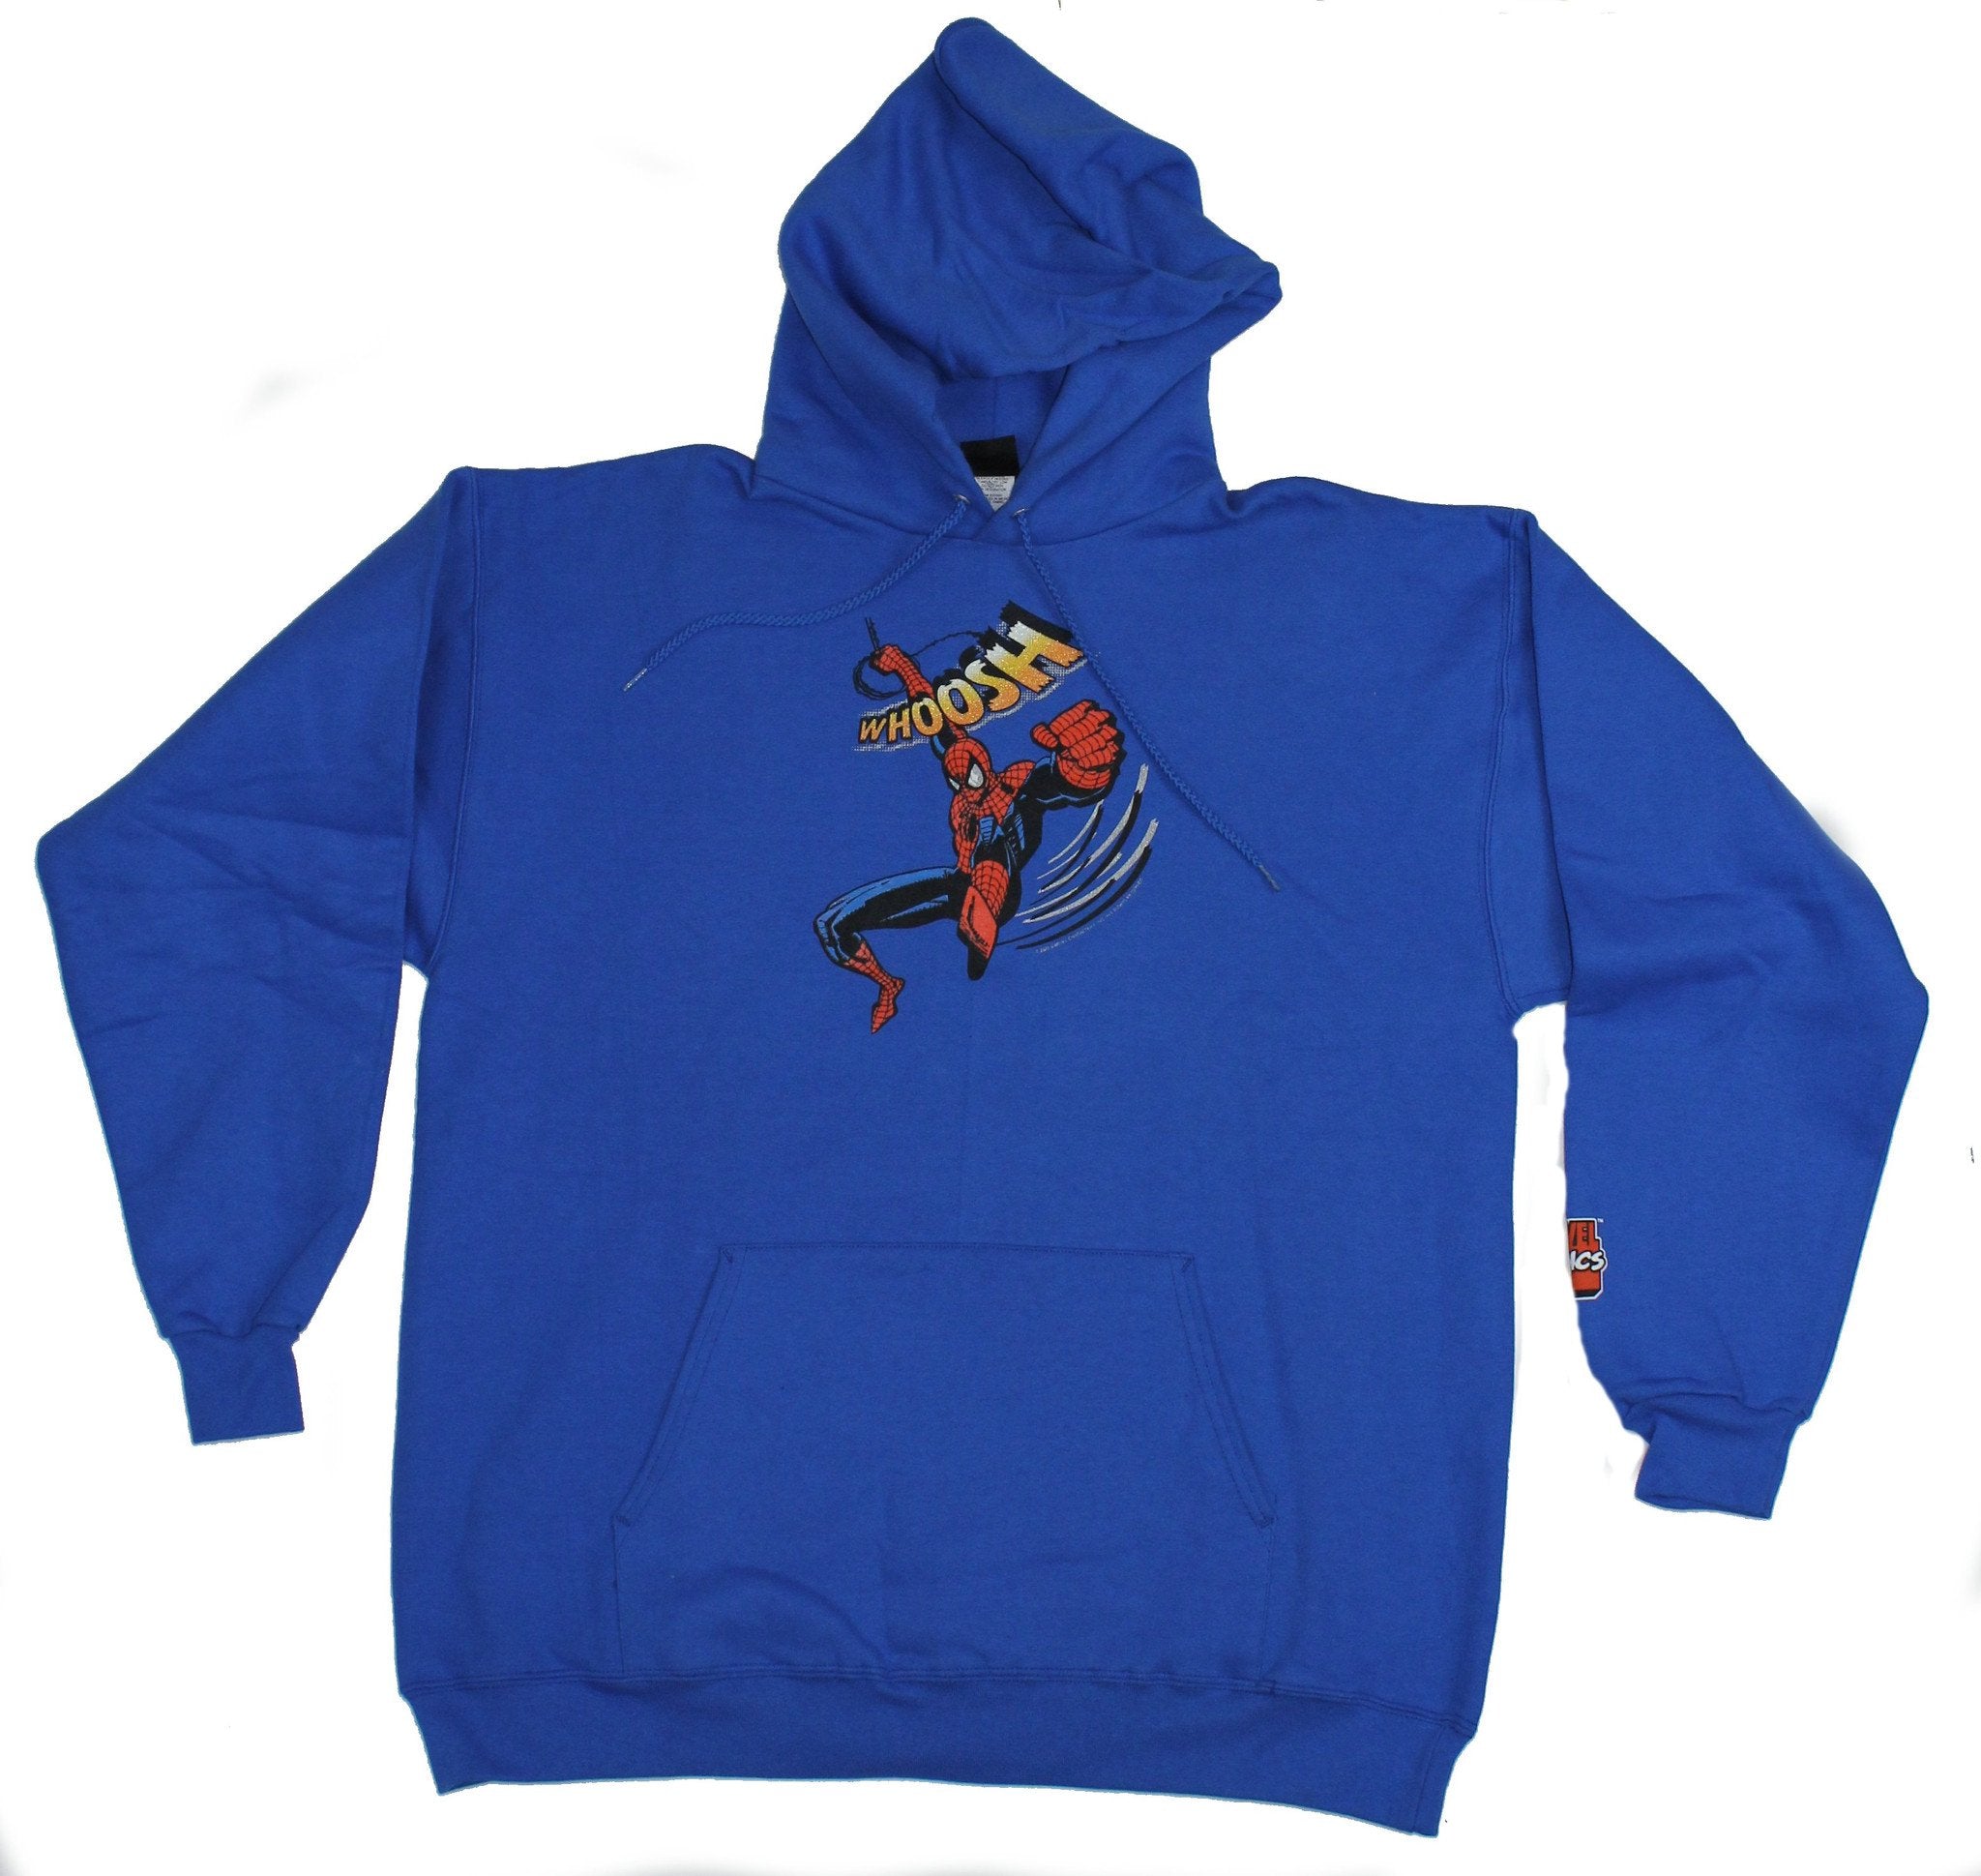 Spider-Man (Marvel Comics) Pullover Hoodie - Whoosh Swinging Punch Image